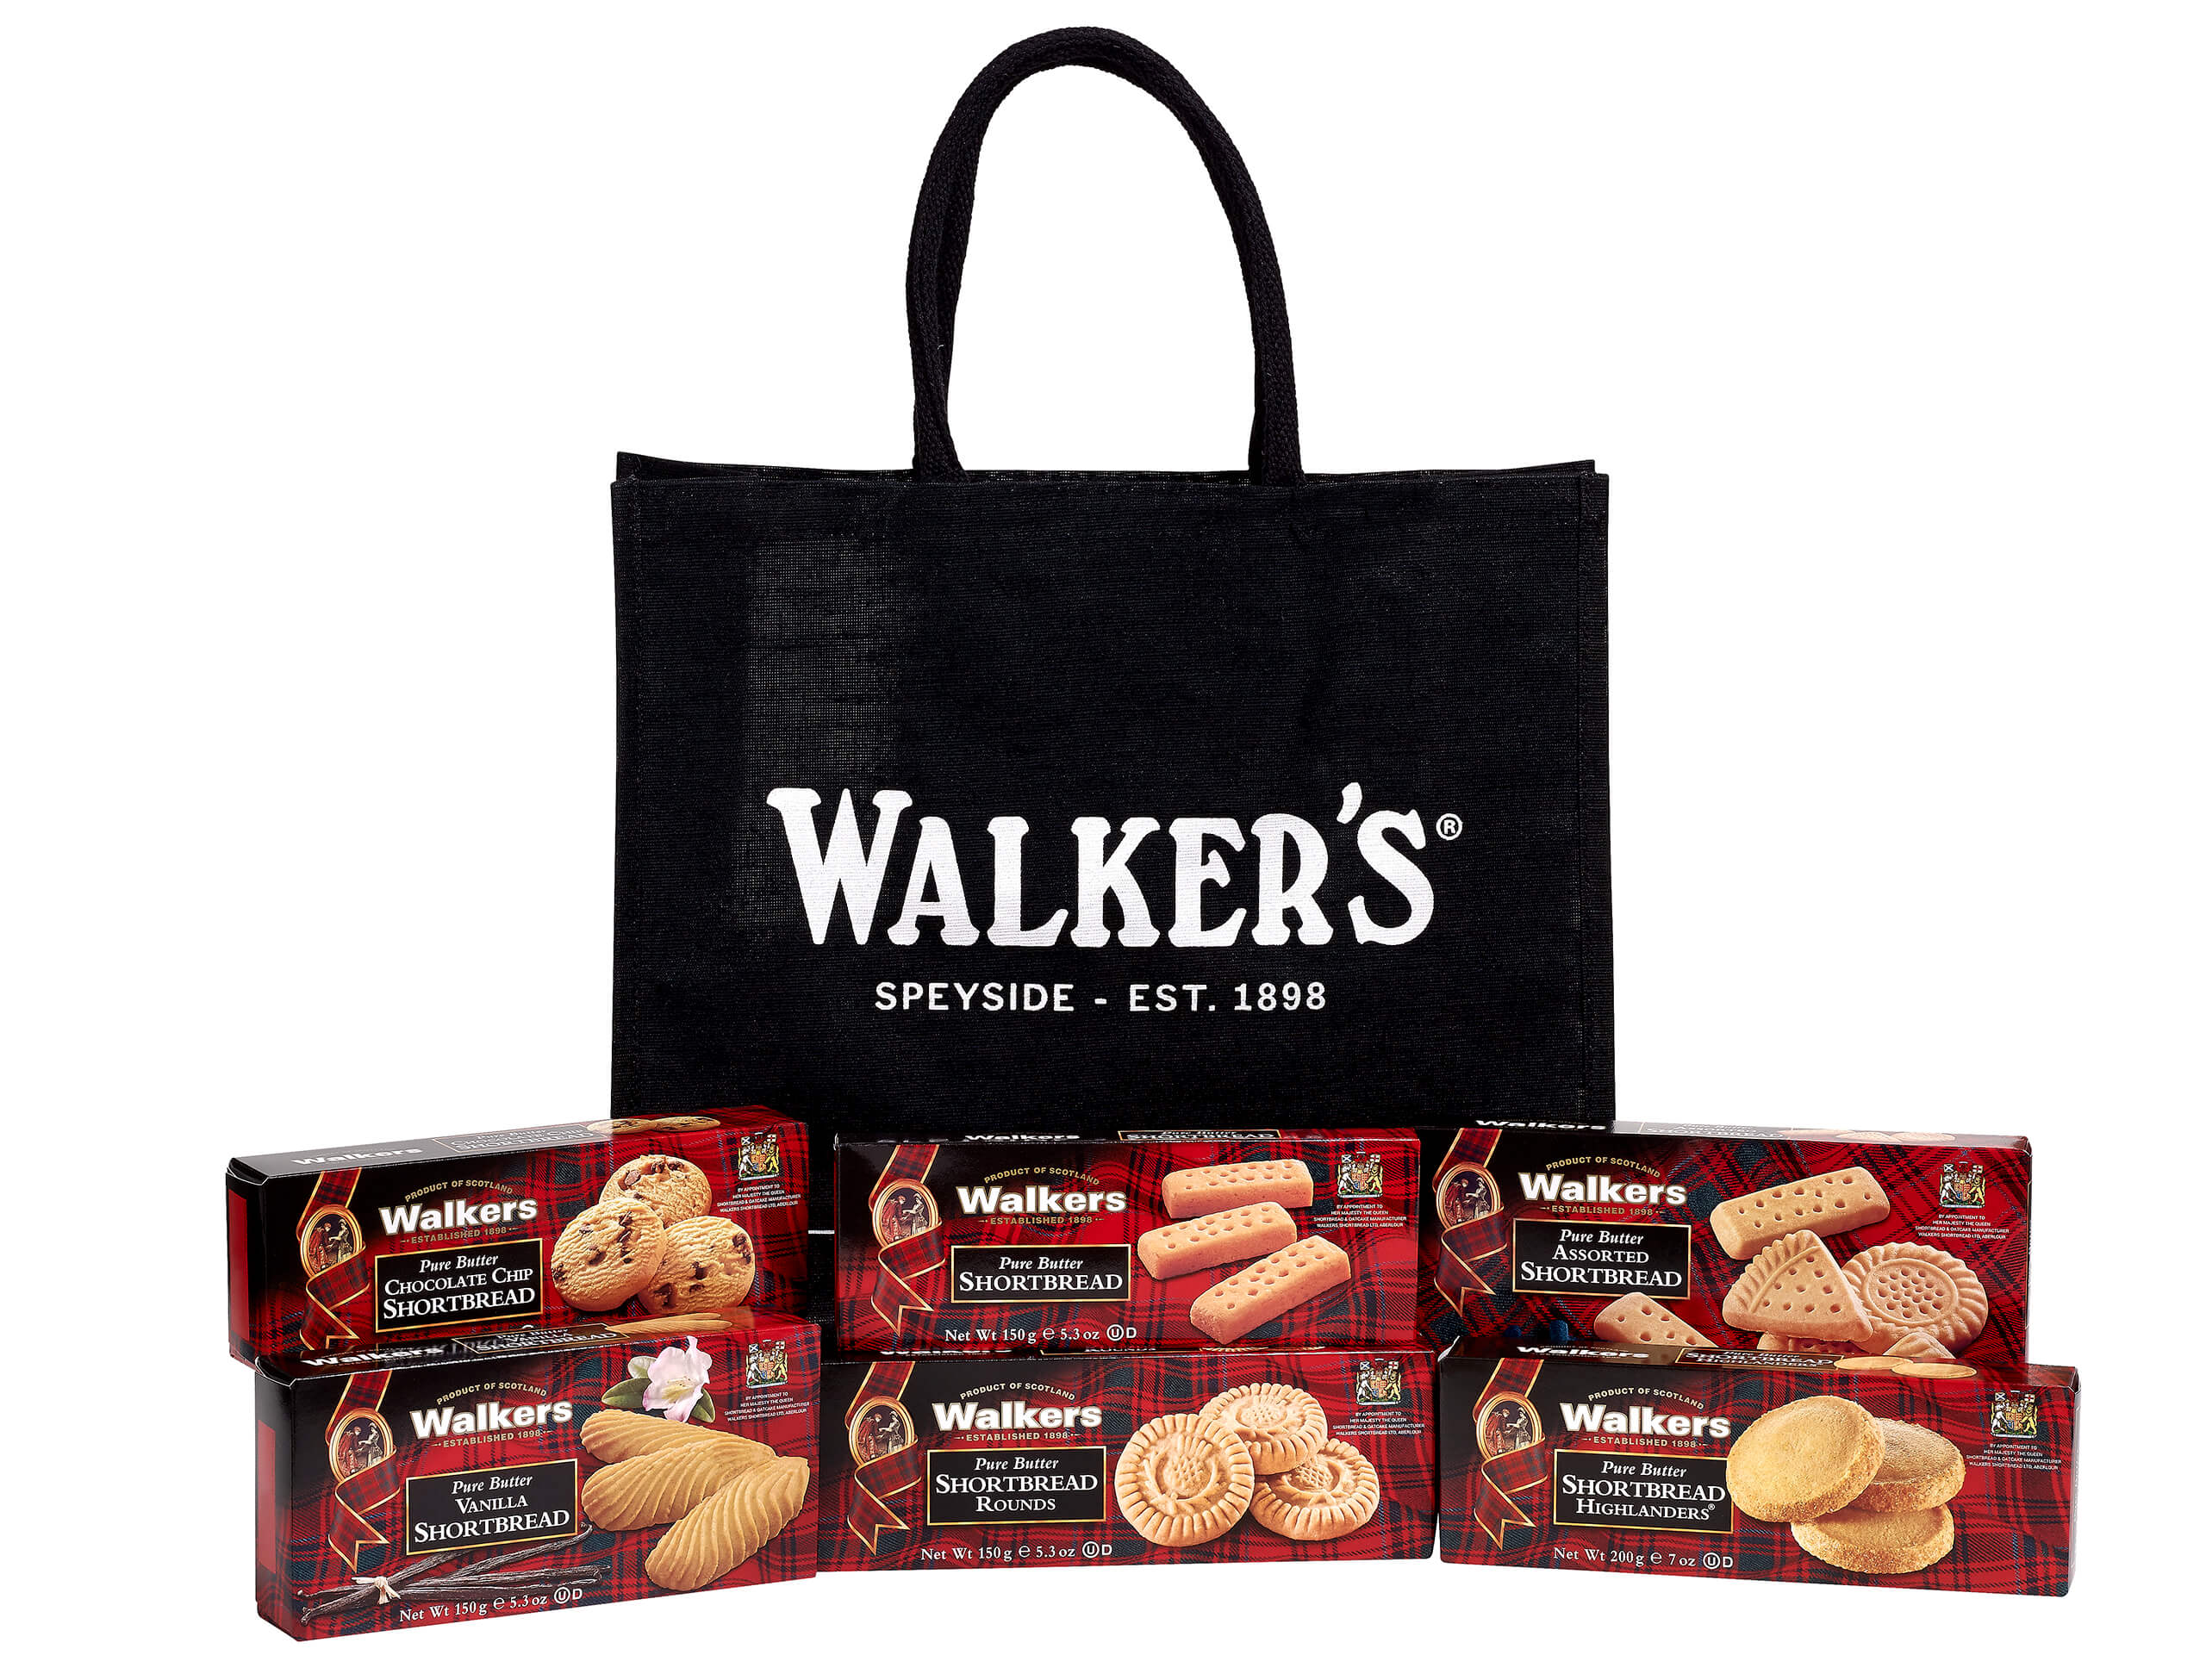 A black Walker's Shortbread branded bag in the background with various product boxes in front of it.